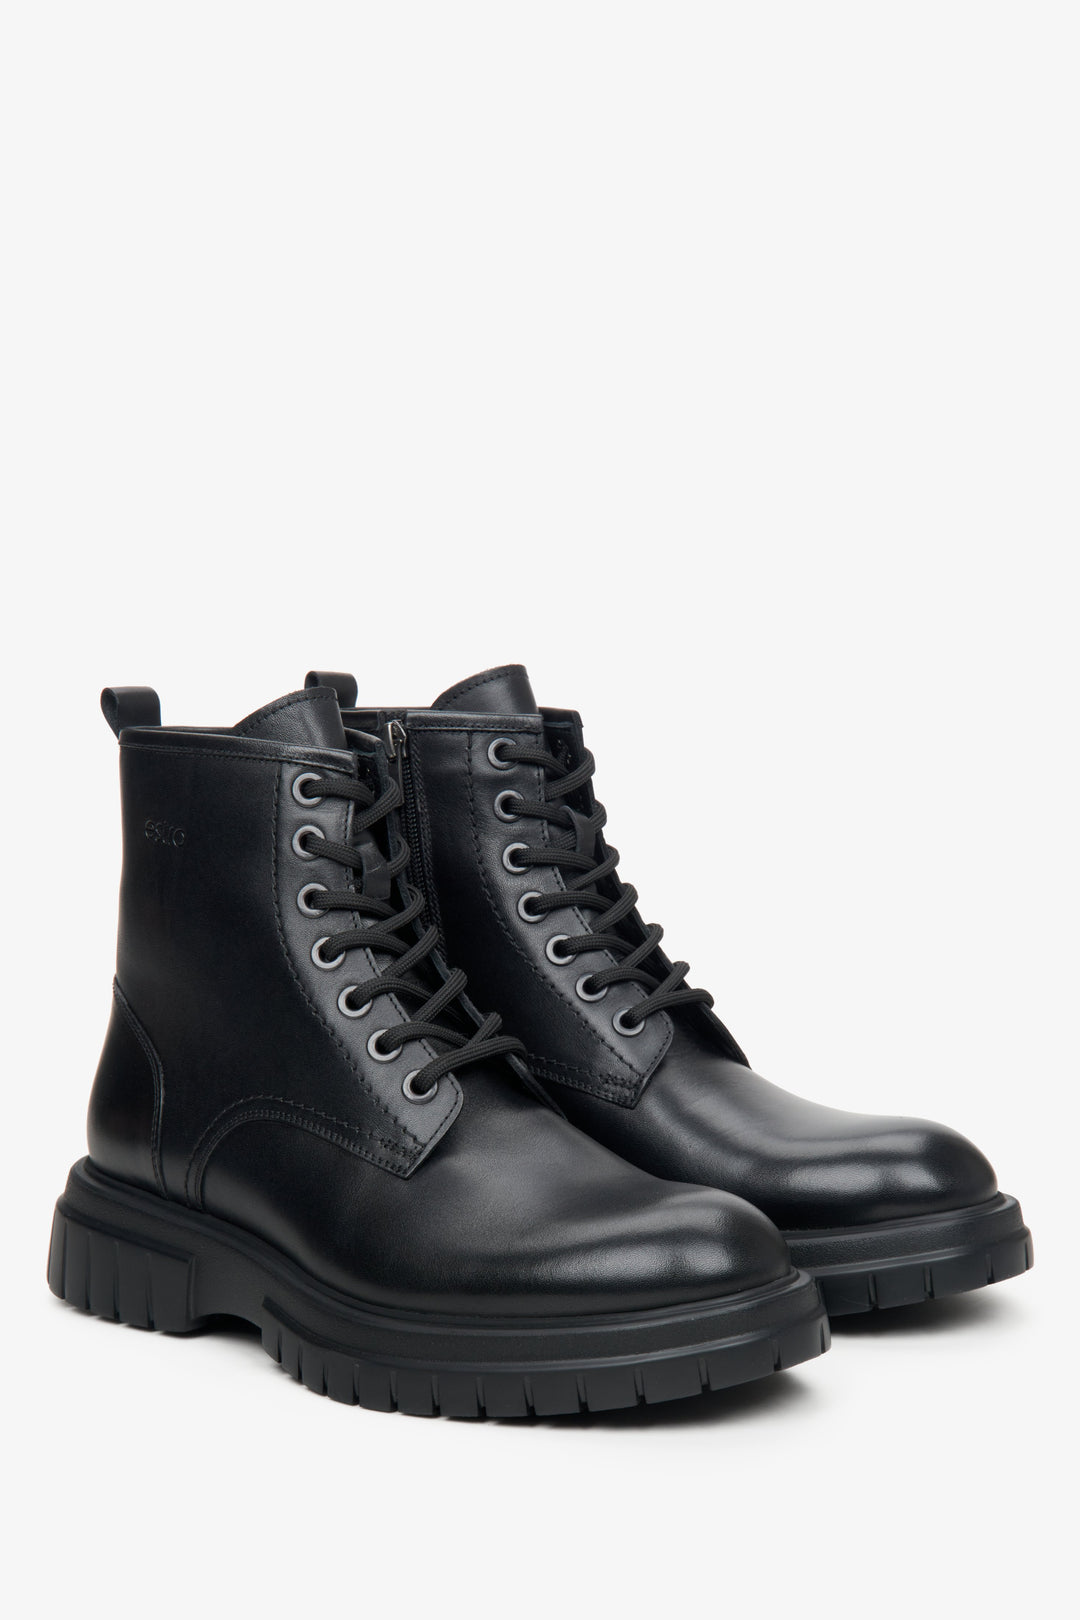 Men's Estro ankle boots made of genuine black leather.